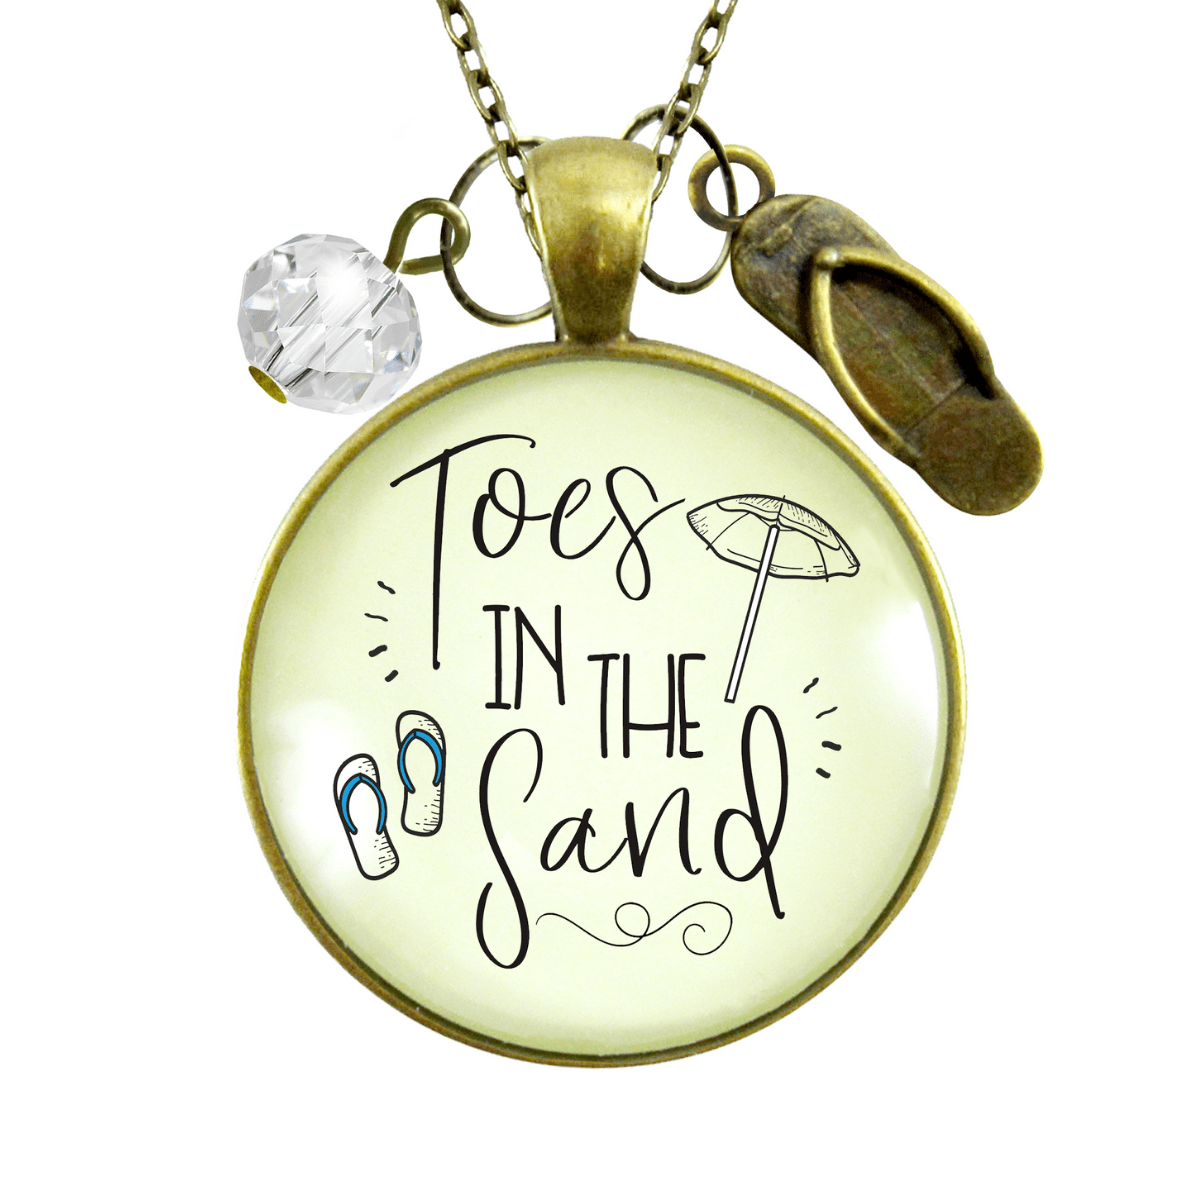 Gutsy Goodness Toes in Sand Ocean Beach Necklace Nautical Quote Flip Flop Jewelry - Gutsy Goodness Handmade Jewelry;Toes In Sand Ocean Beach Necklace Nautical Quote Flip Flop Jewelry - Gutsy Goodness Handmade Jewelry Gifts